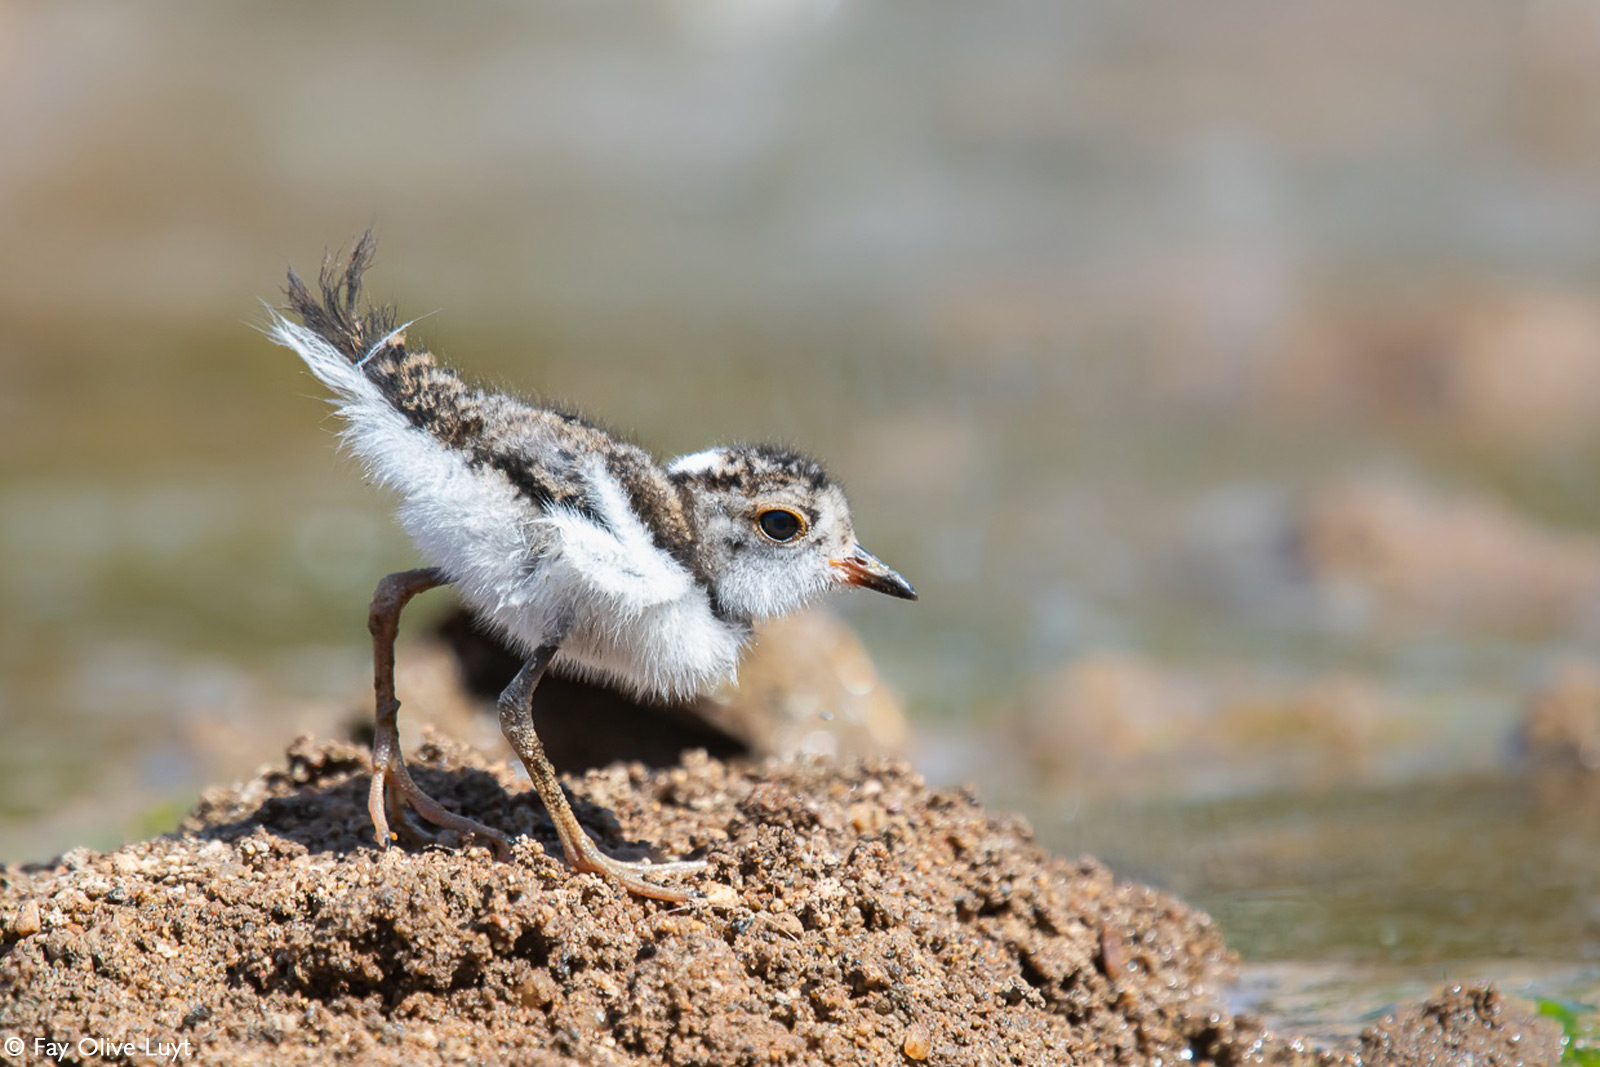 A three-banded plover chick. Kruger National Park, South Africa © Fay Olive Luyt